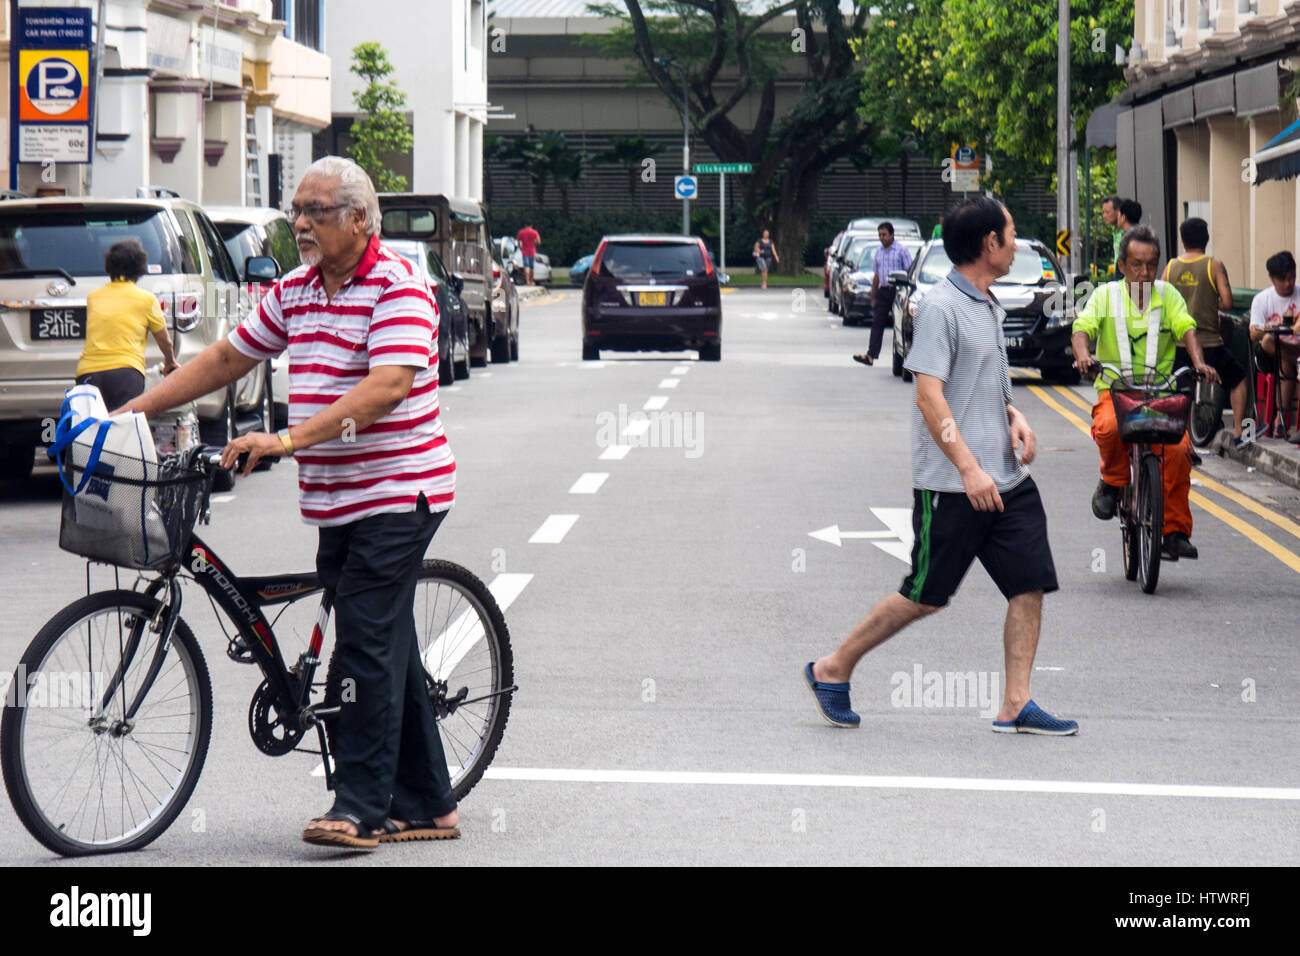 Pedestrian and cycling traffic on a street in suburban Singapore. Stock Photo